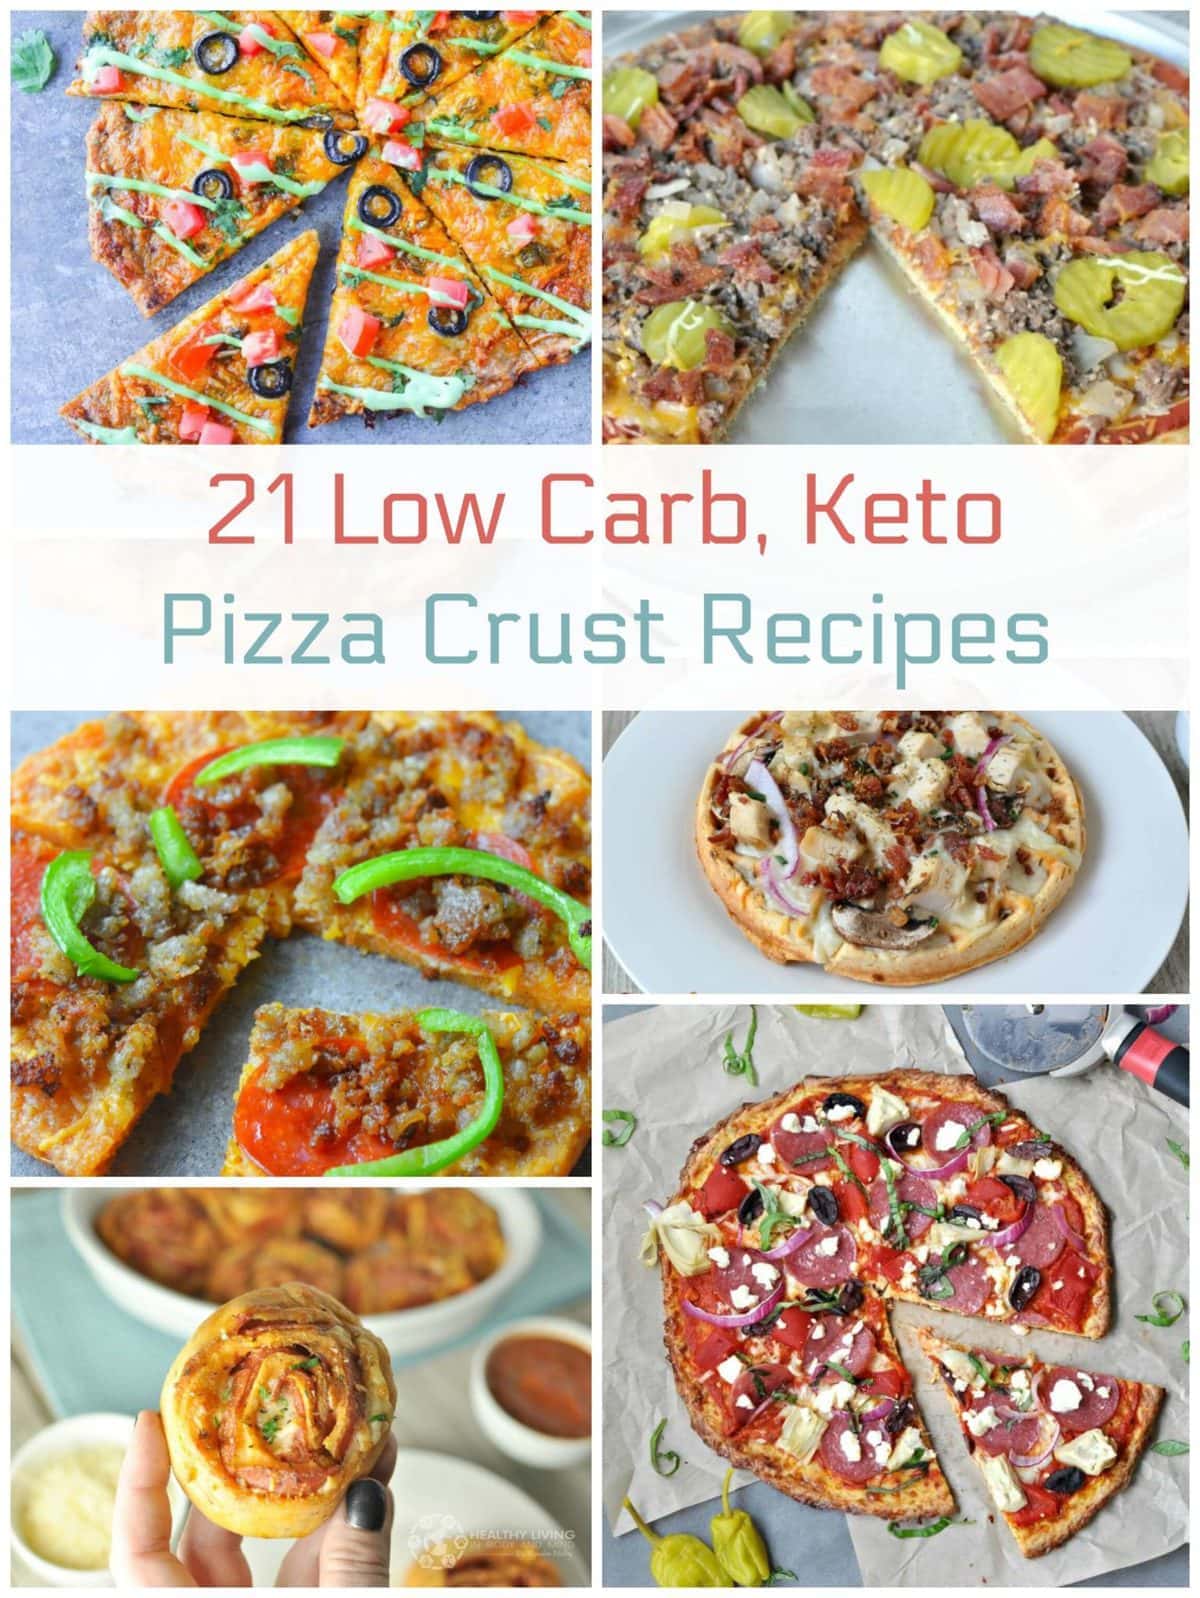 21 Low Carb Keto Pizza Crust Recipes | Peace Love and Low Carb